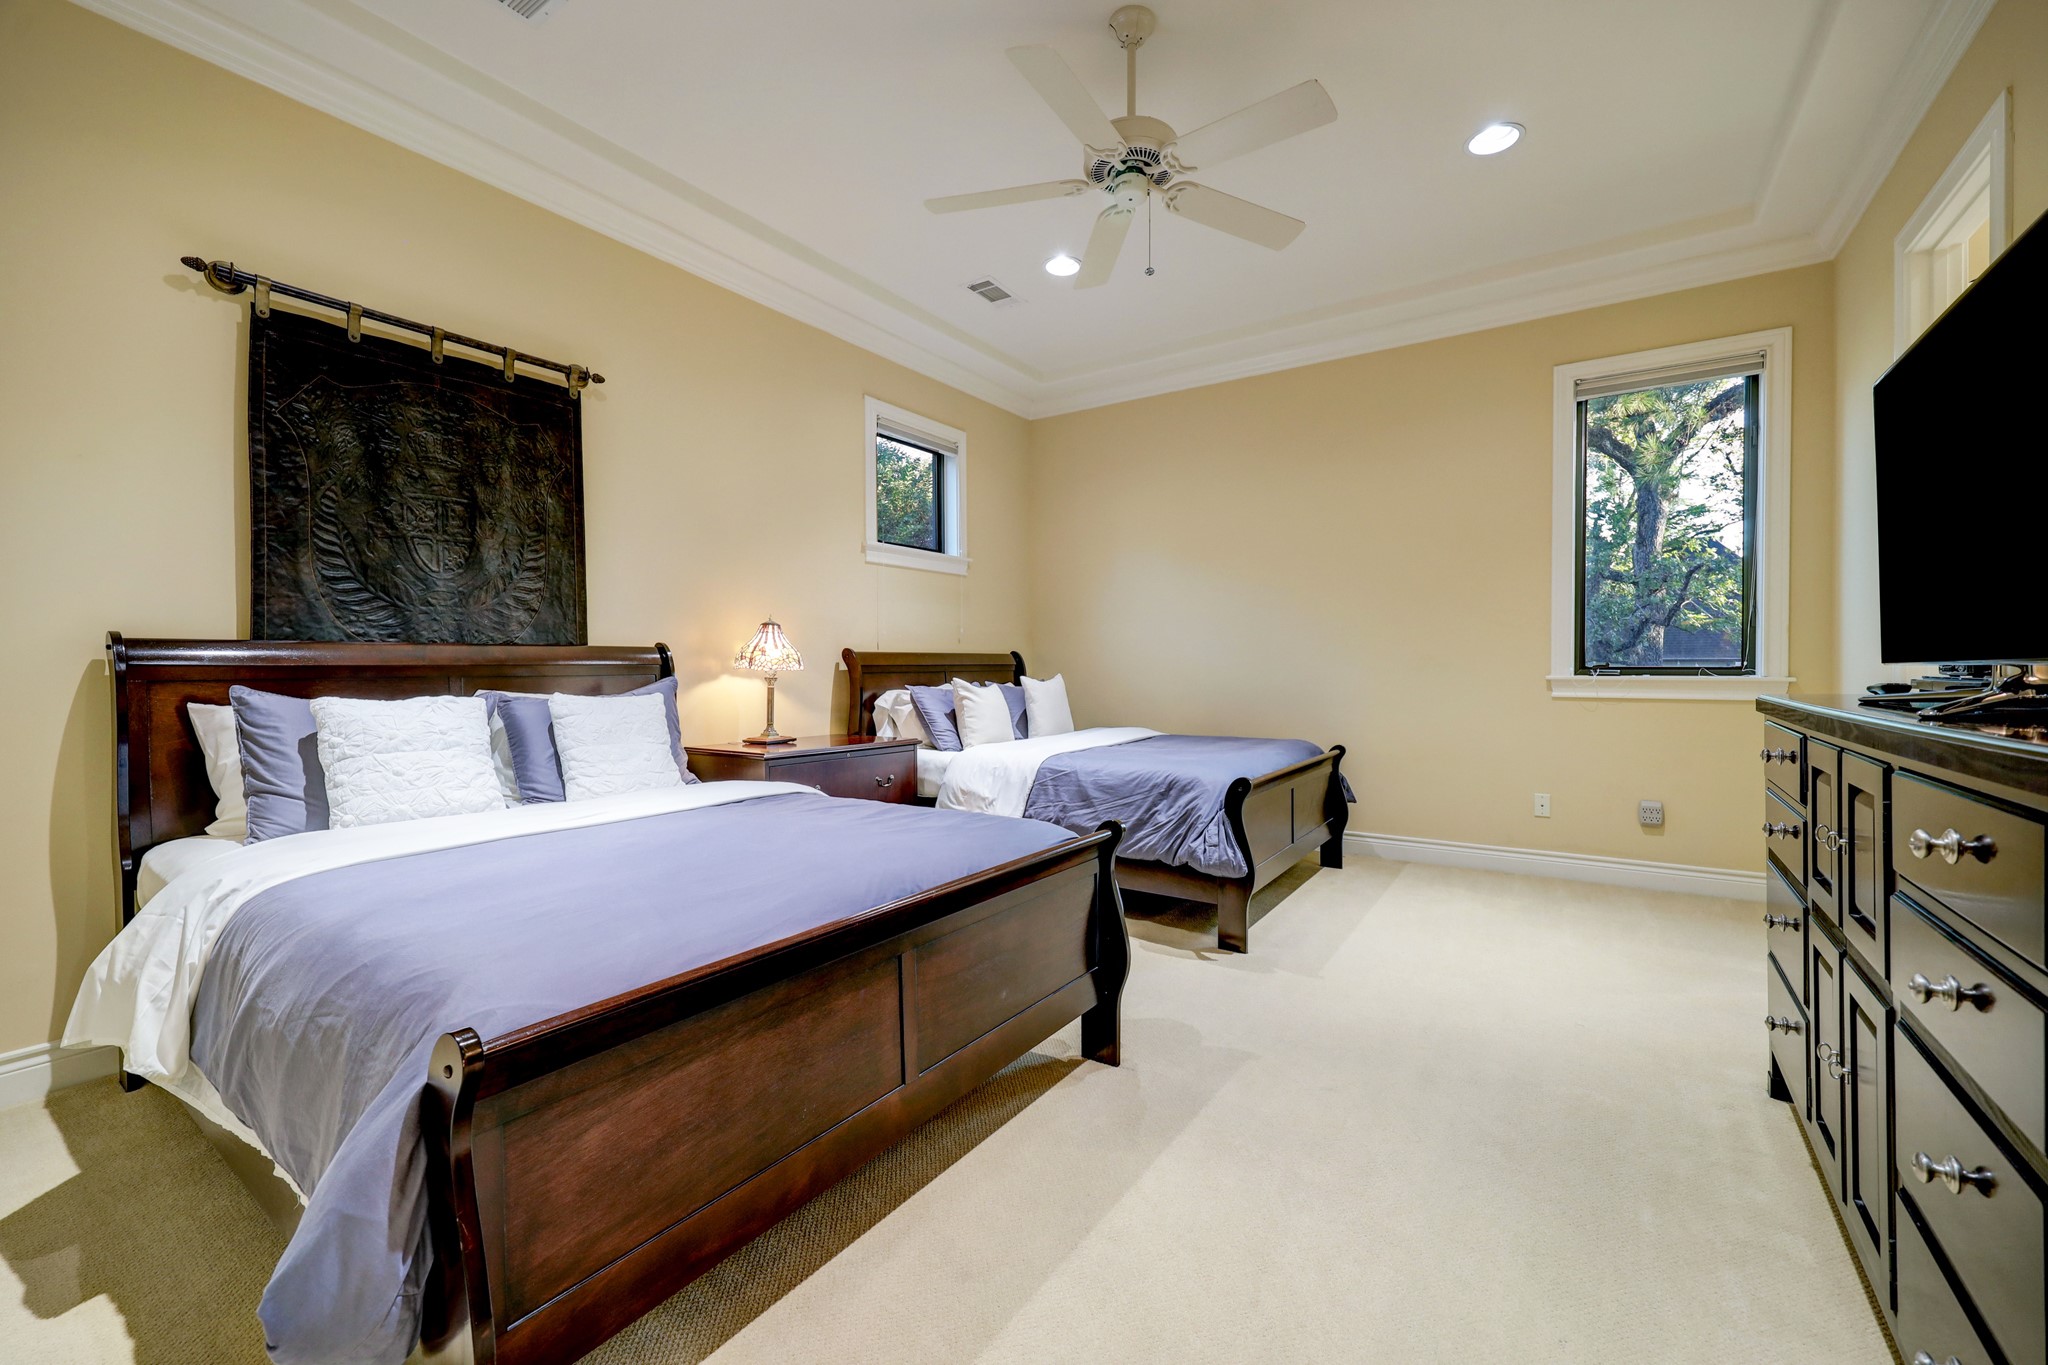 This Secondary Bedroom [17 x 13] features carpet, crown molding and baseboards, a walk-in closet and en-suite bathroom.